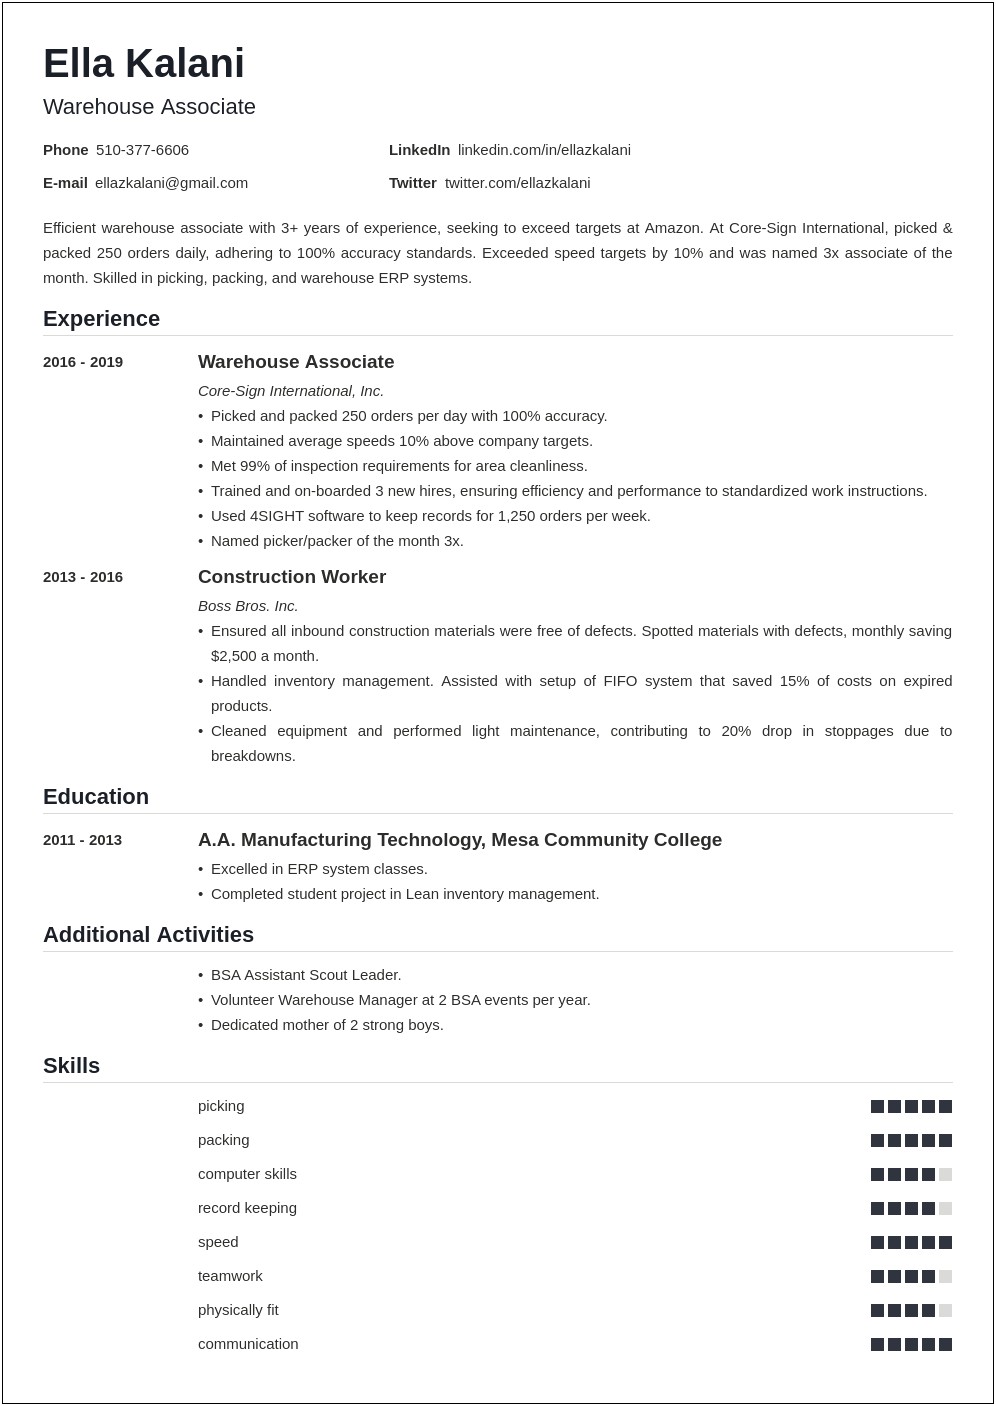 Good Resume Summary Statements For Warehouse Position